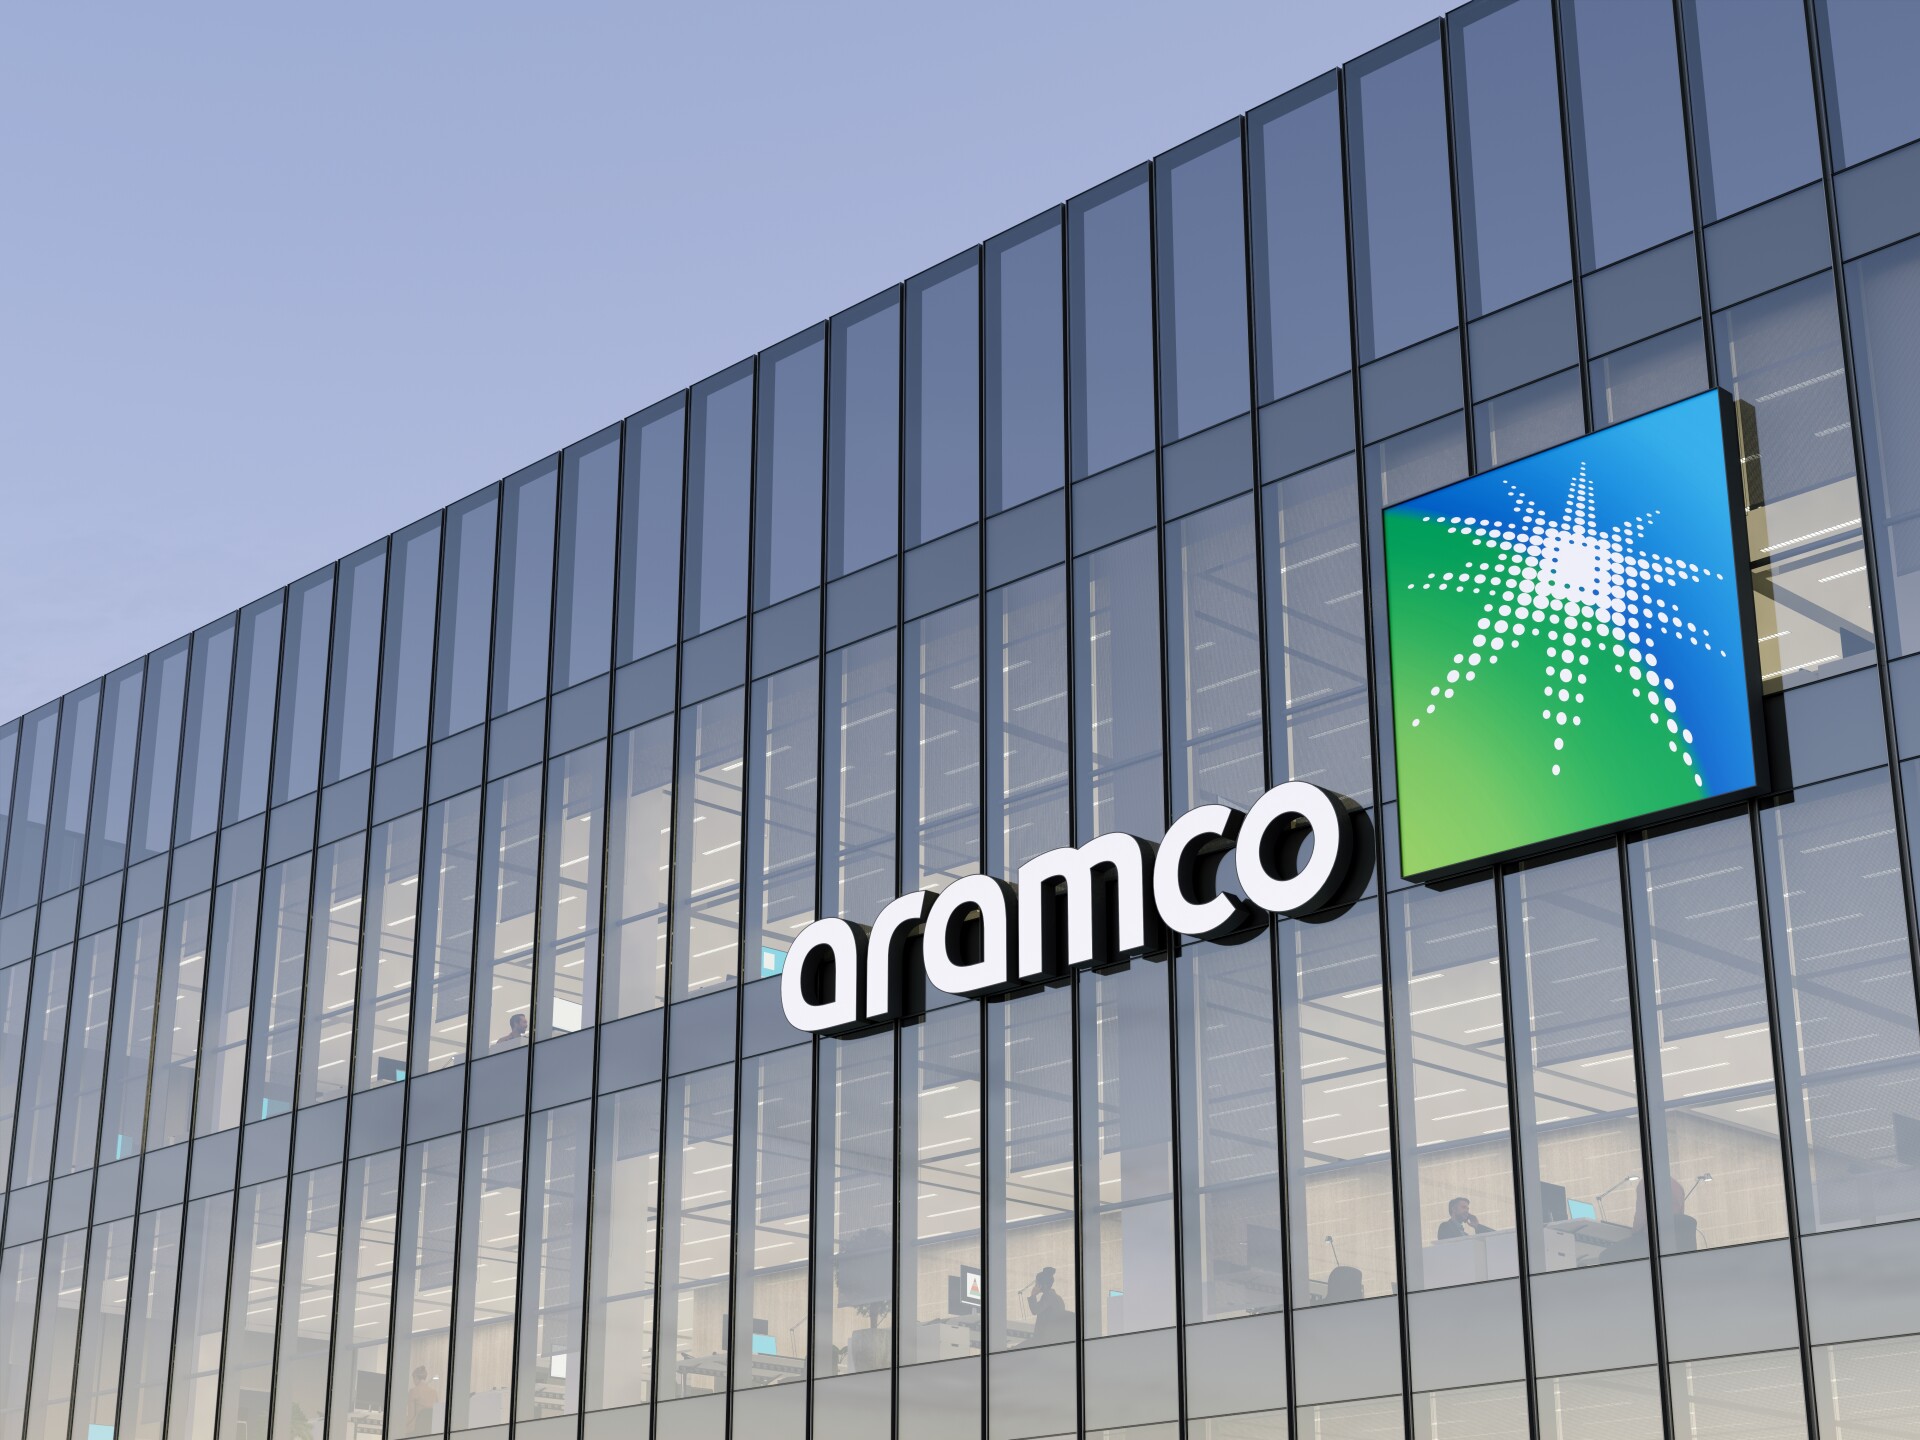 Saudi Arabia’s Aramco expands presence in China by acquiring 10% stake in Rongsheng